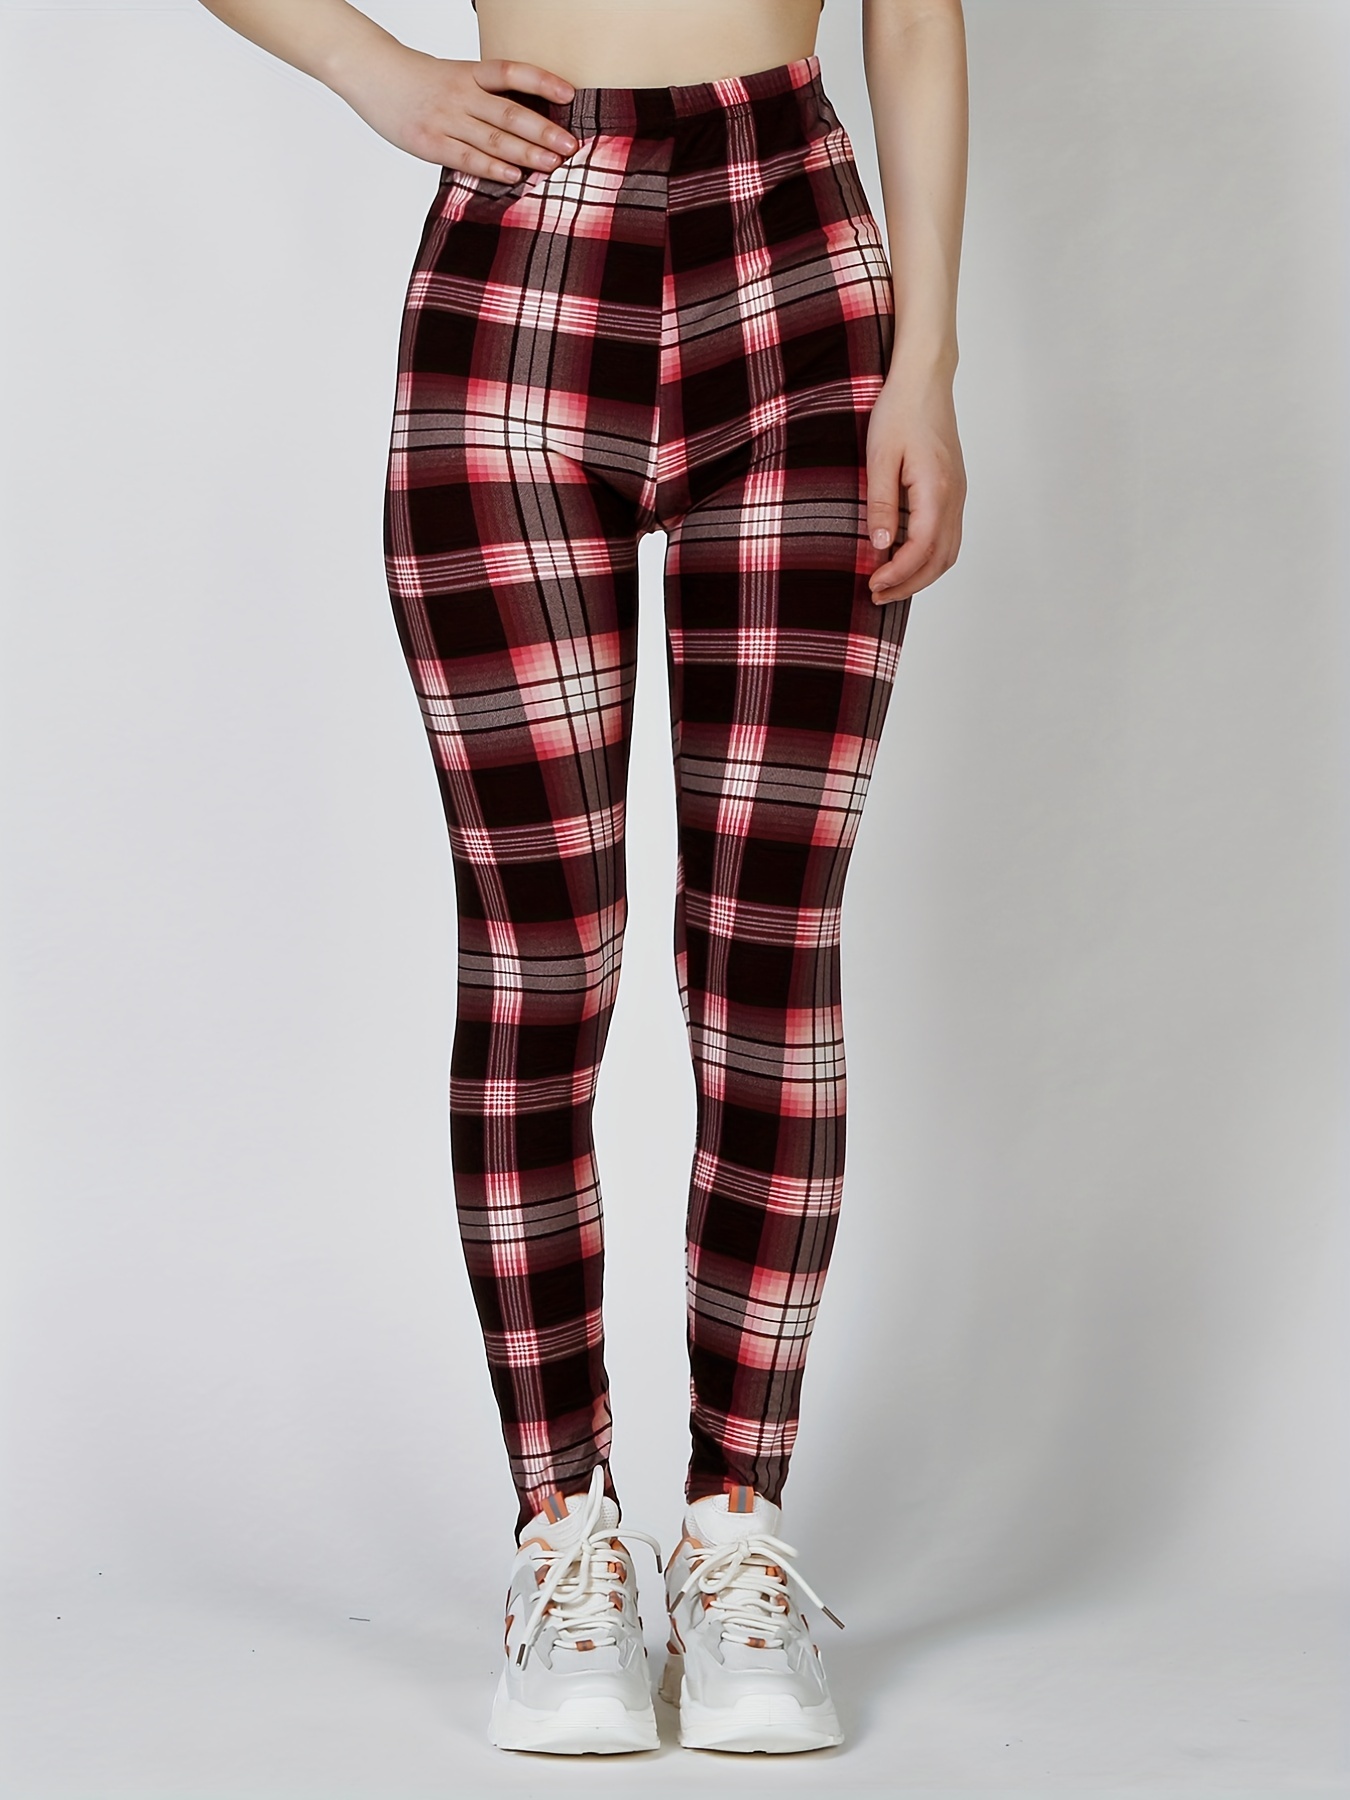 Stylish and Elegant Red Check Plaid High Waist Leggings Tight Pants  Trousers